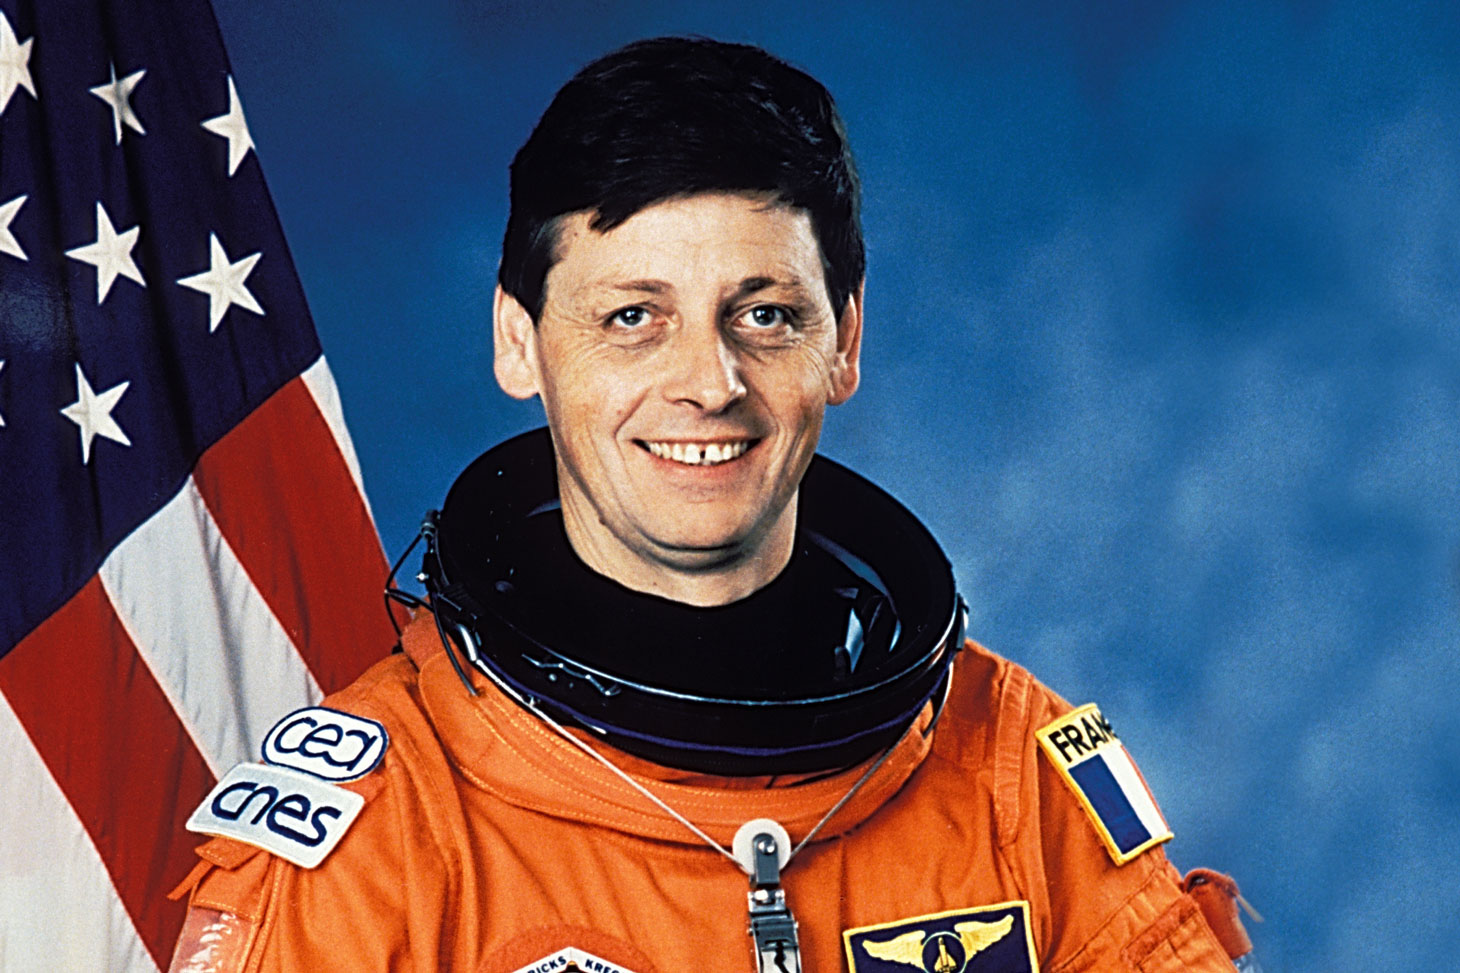 Jean-Jacques Favier in 1996 during his space mission aboard the American shuttle Columbia © NASA